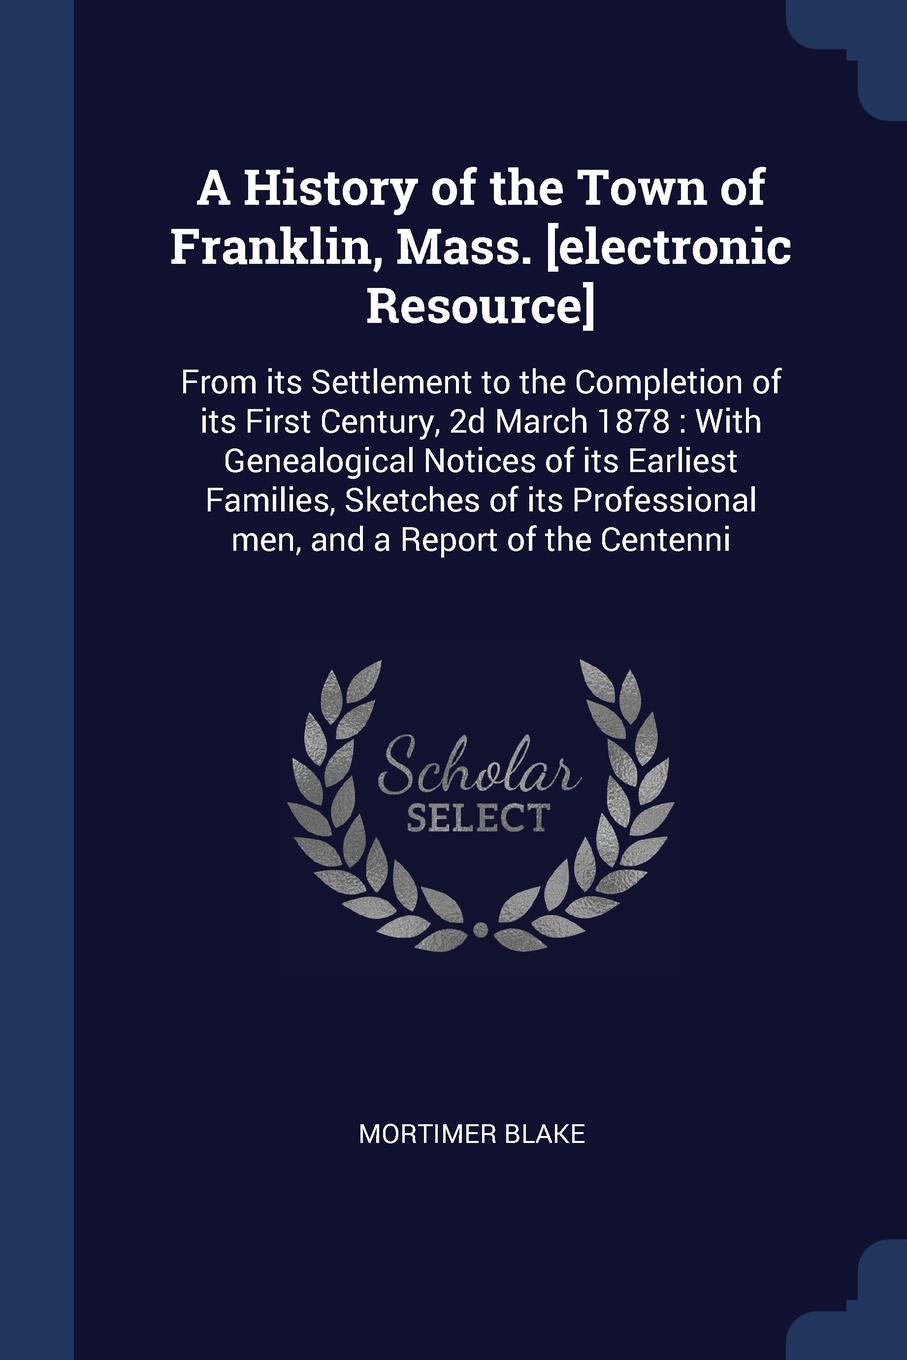 A History of the Town of Franklin, Mass. .electronic Resource.. From its Settlement to the Completion of its First Century, 2d March 1878 : With Genealogical Notices of its Earliest Families, Sketches of its Professional men, and a Report of the C...